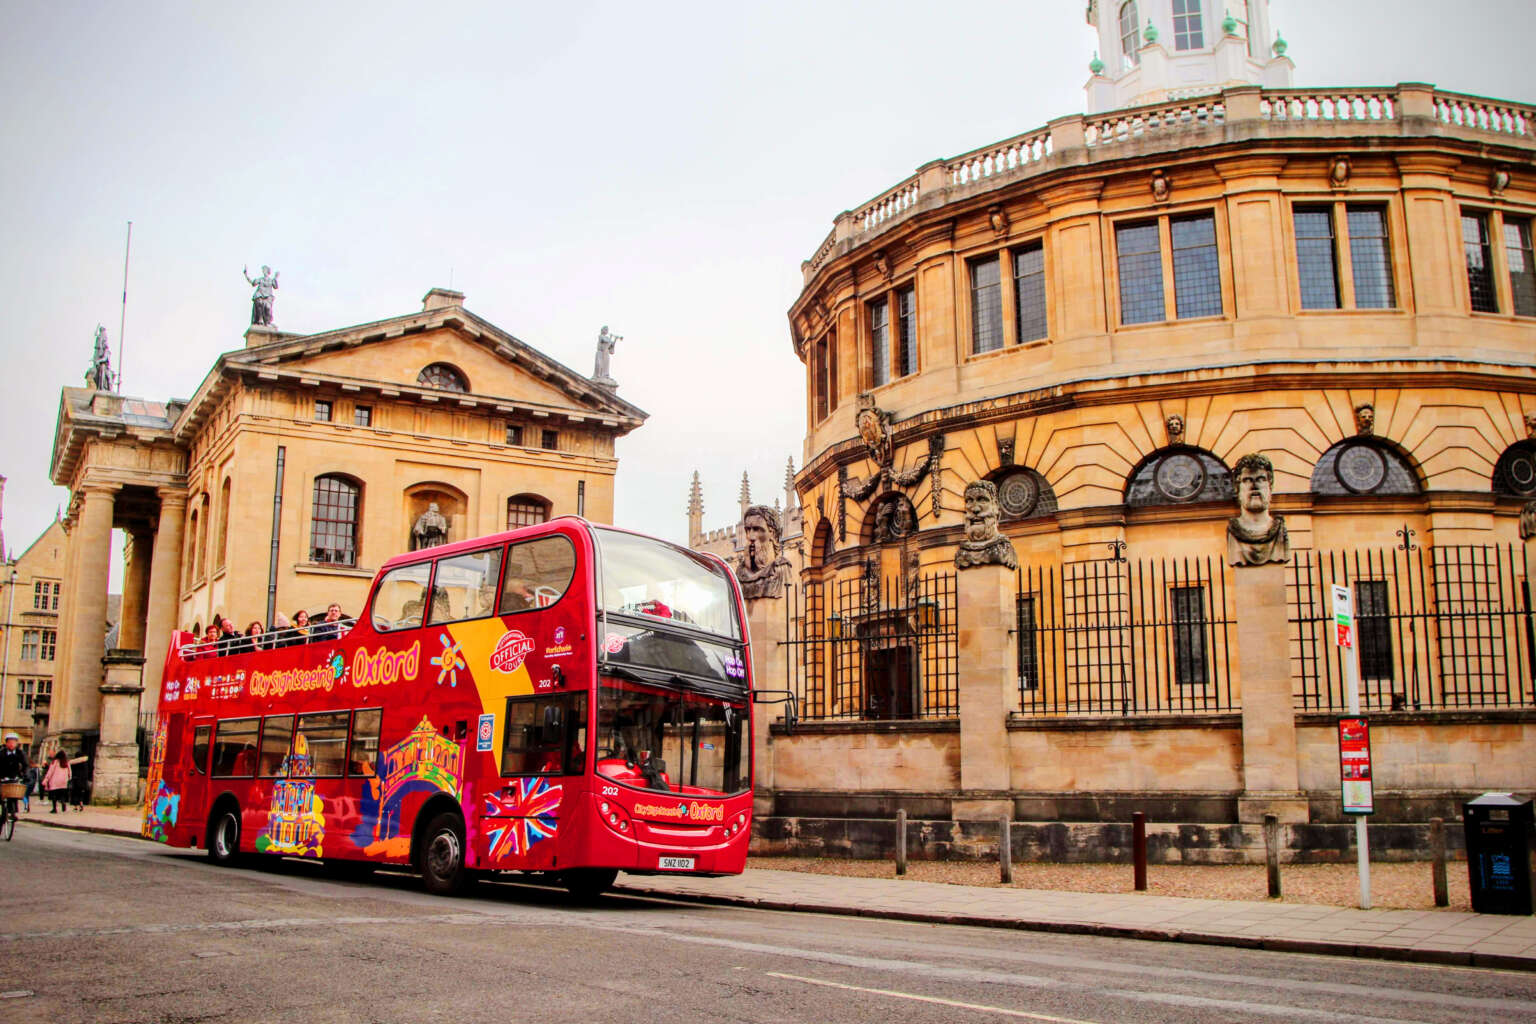 bus tours from oxford